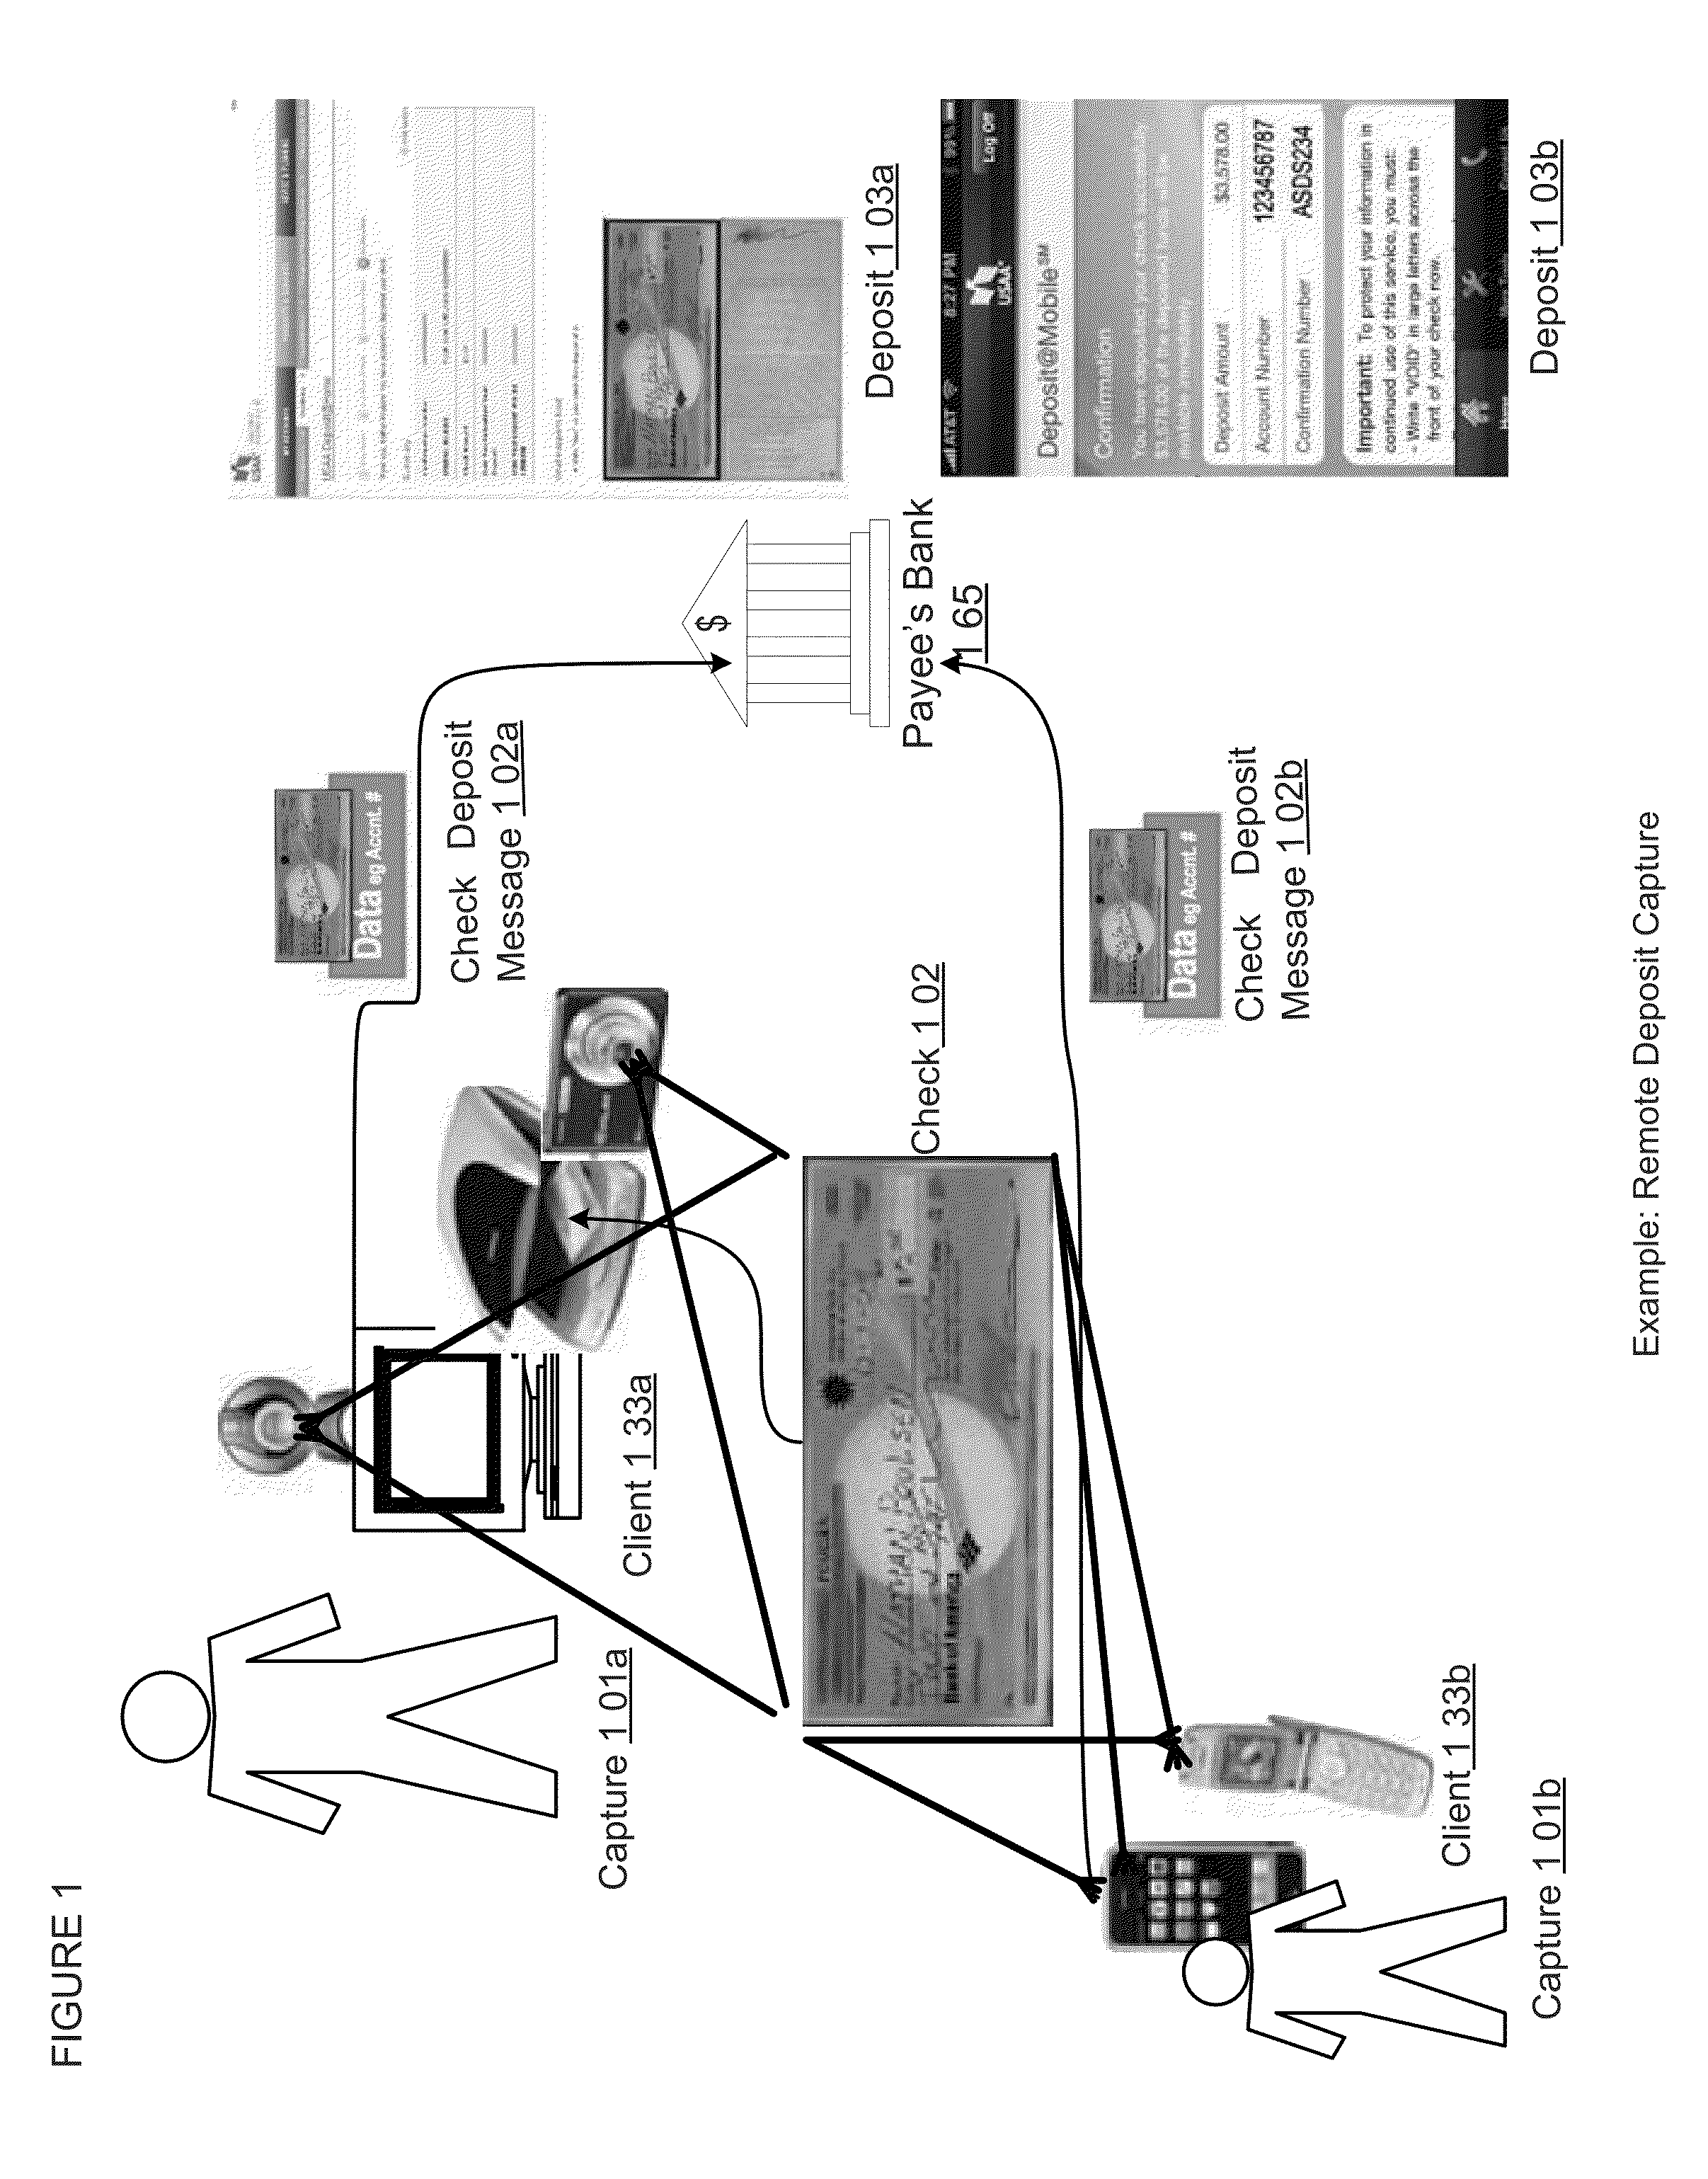 Remote deposit image inspection apparatuses, methods and systems